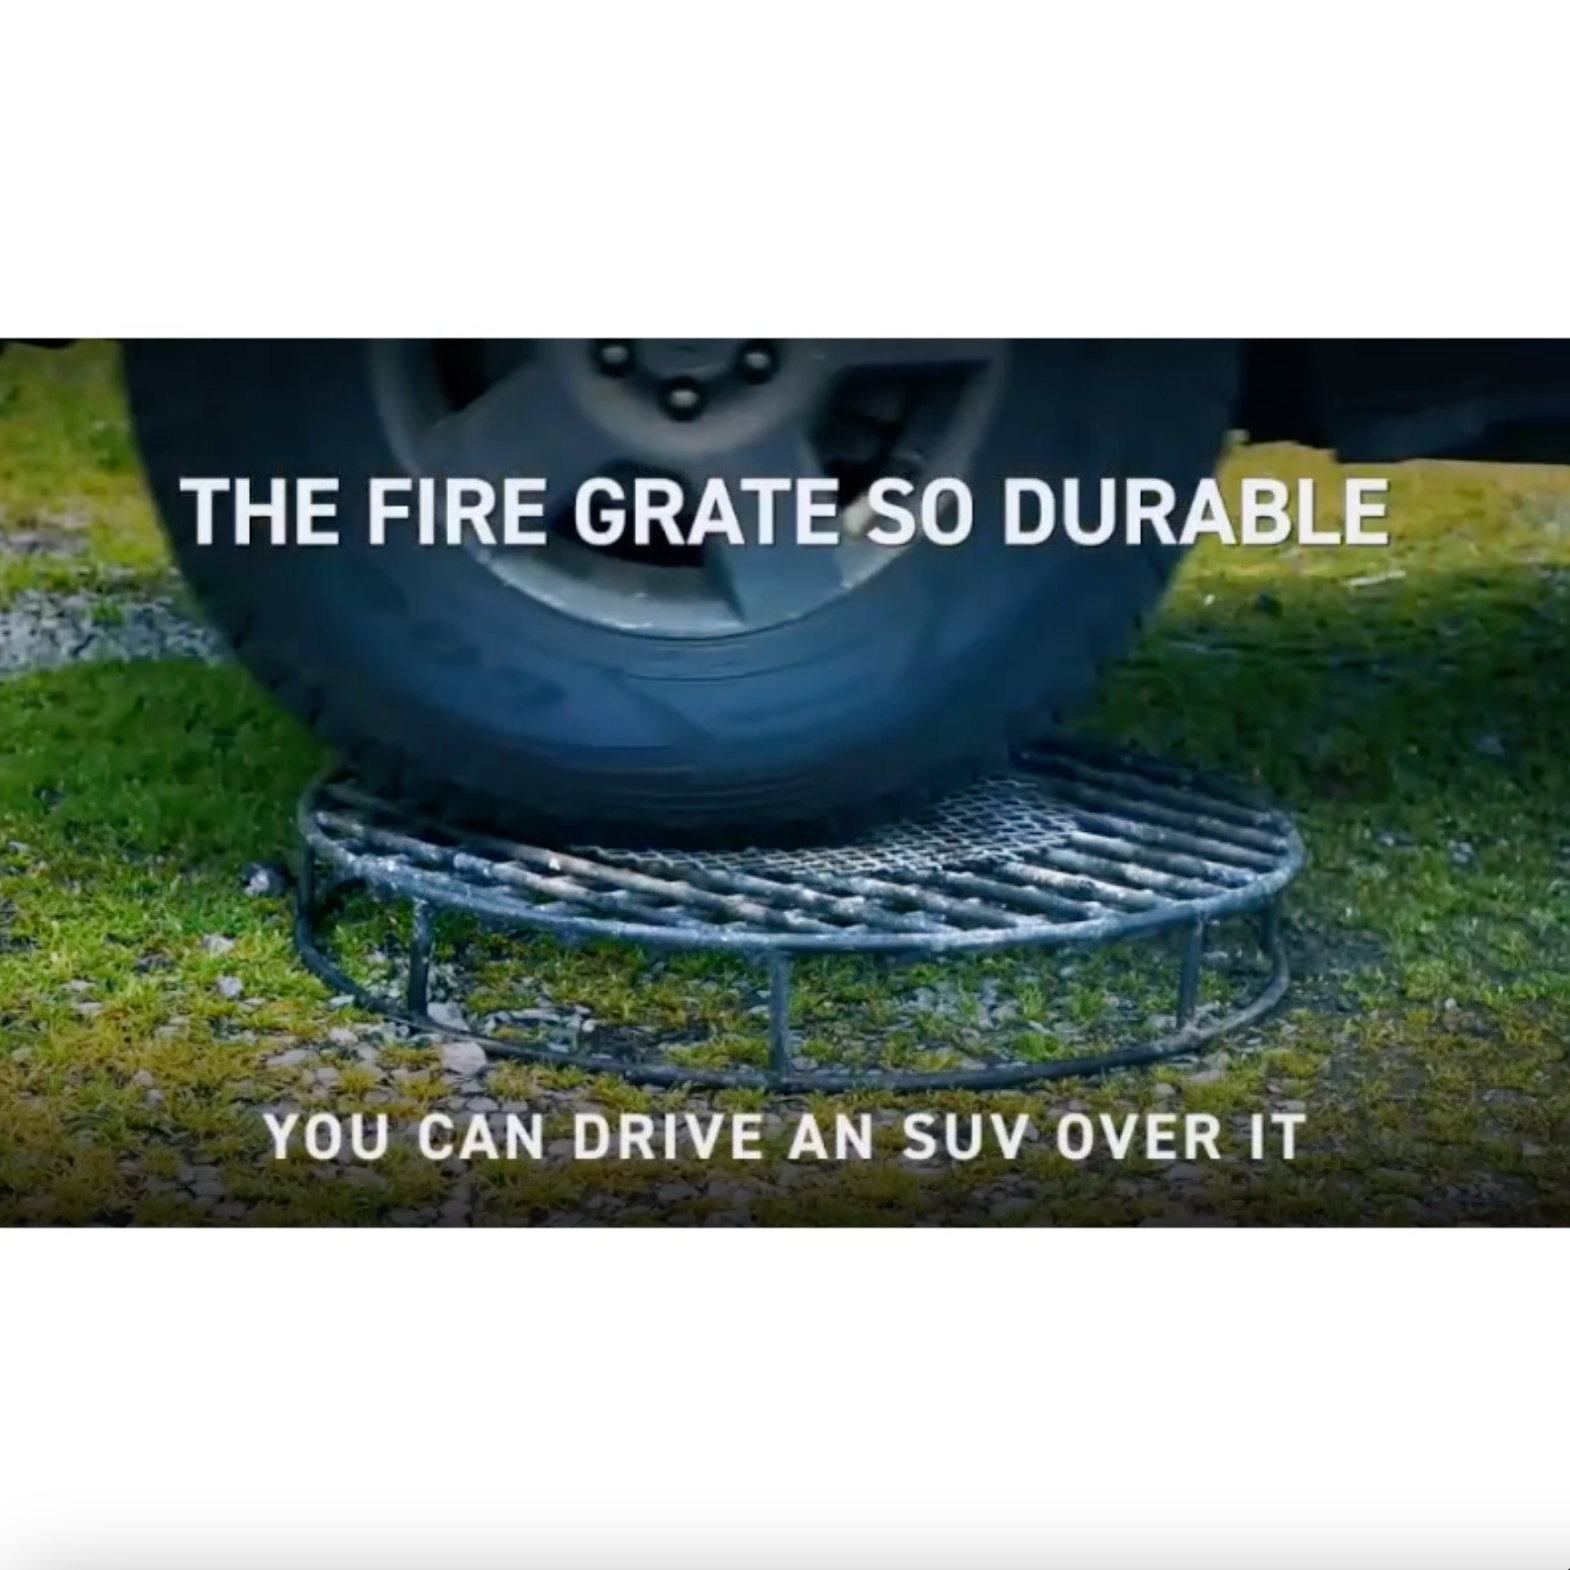 The Fire Pit Grate so durable you can drive a truck over it.